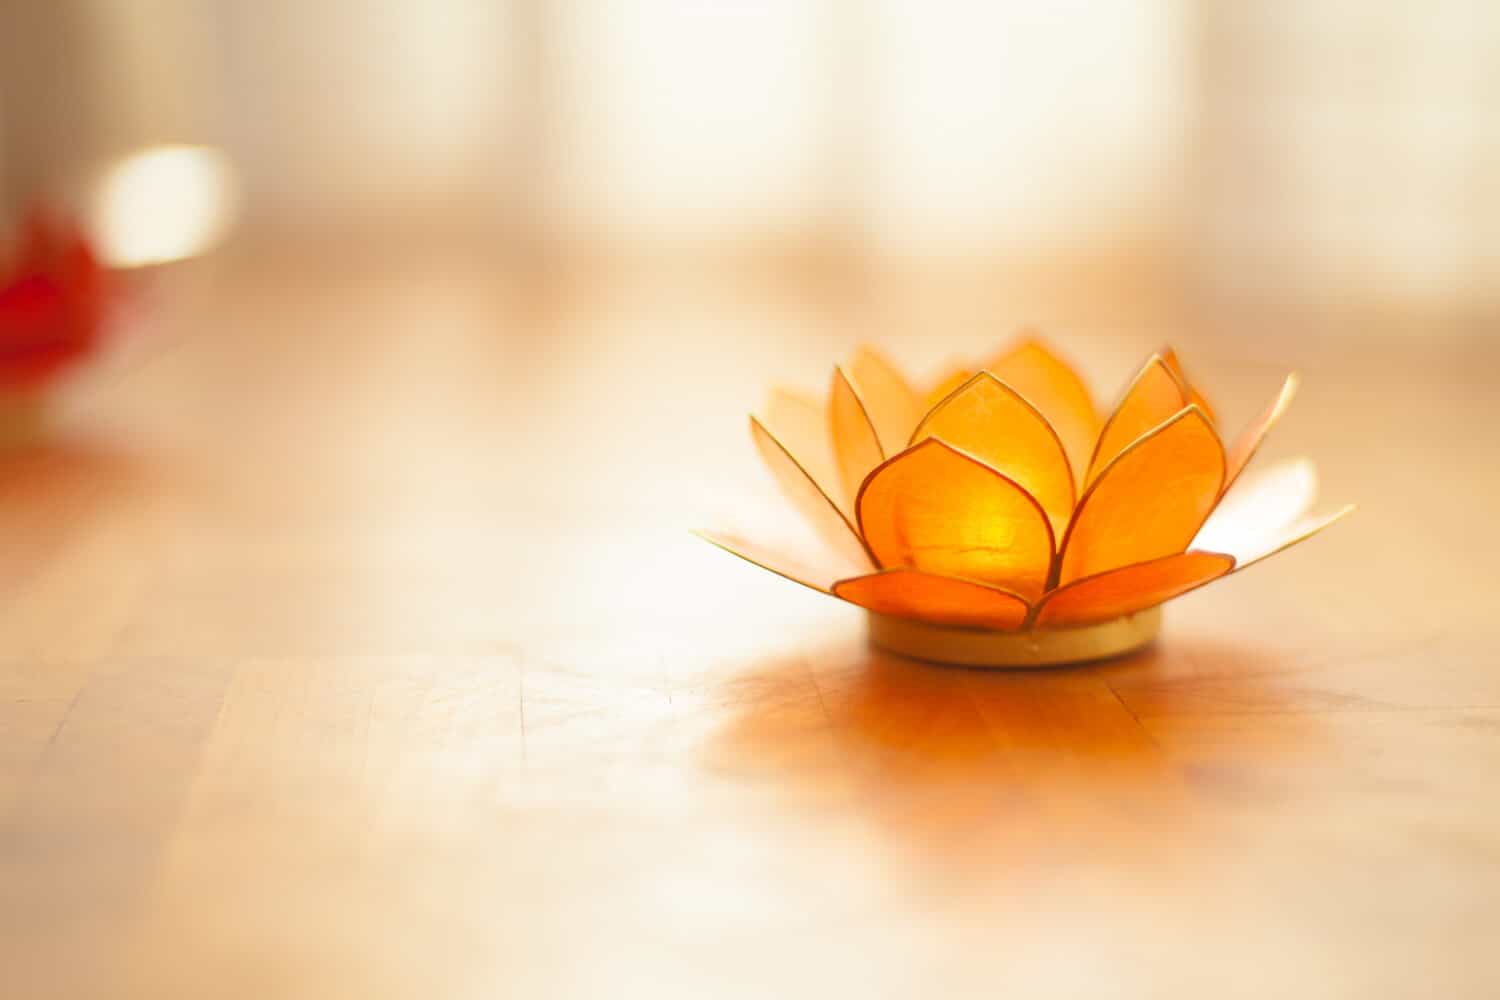 Lotus flower candle image to illustrate page about intuition foundation development